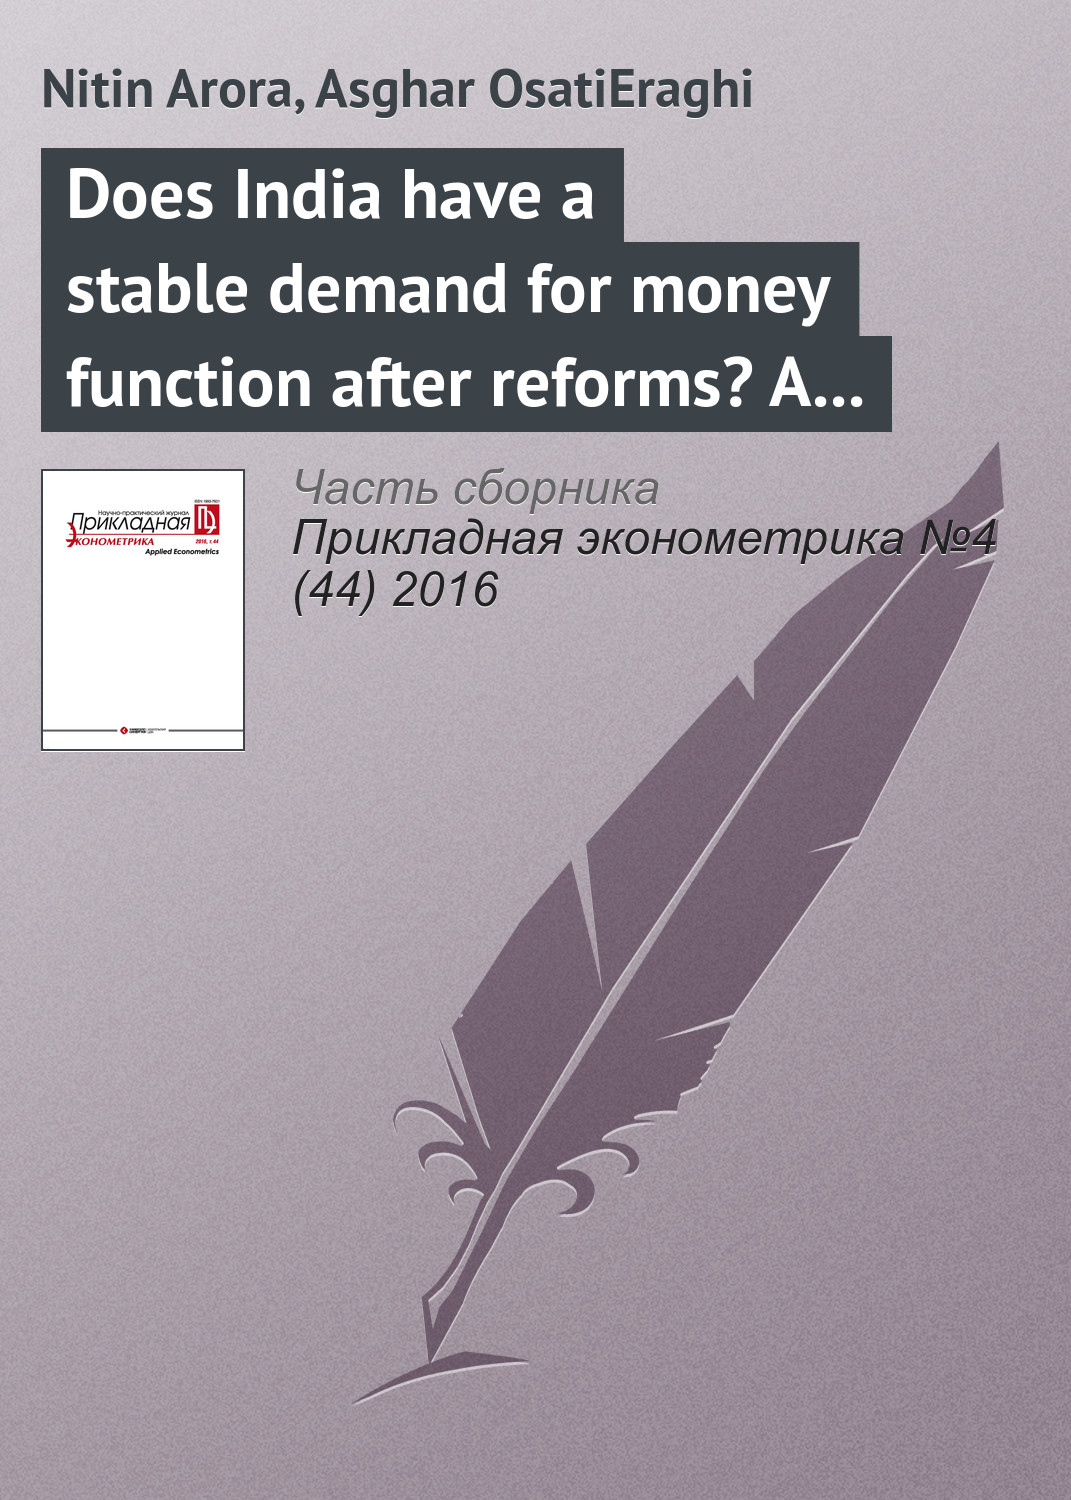 Does India have a stable demand for money function after reforms? A macroeconometric analysis